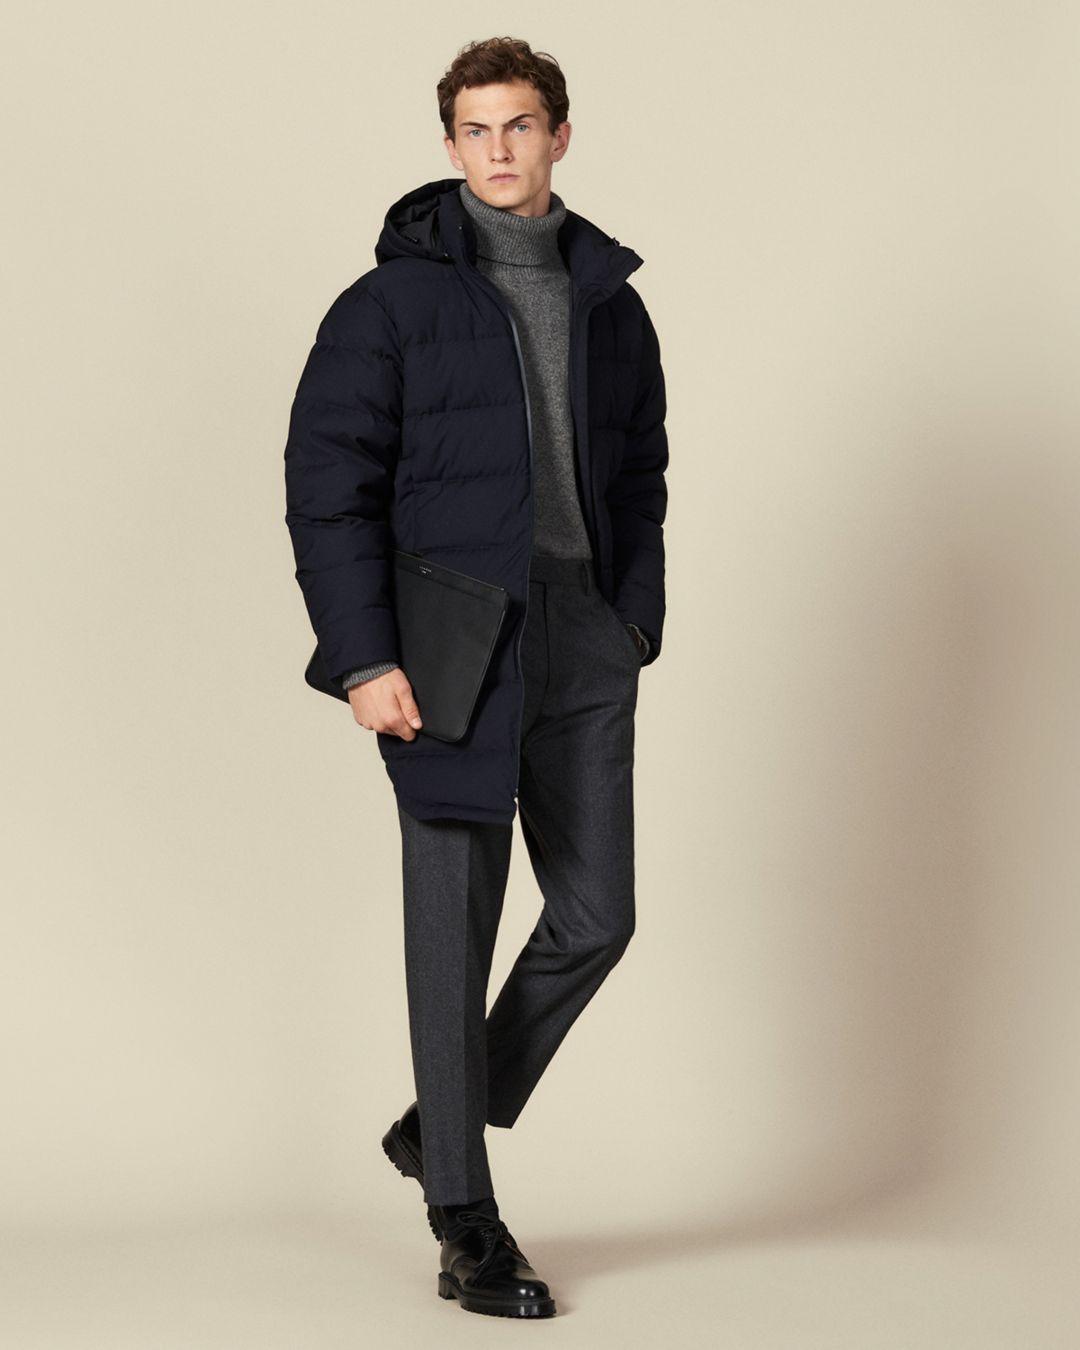 Sandro Synthetic Long Down Puffer Jacket in Navy Blue (Blue) for Men - Lyst